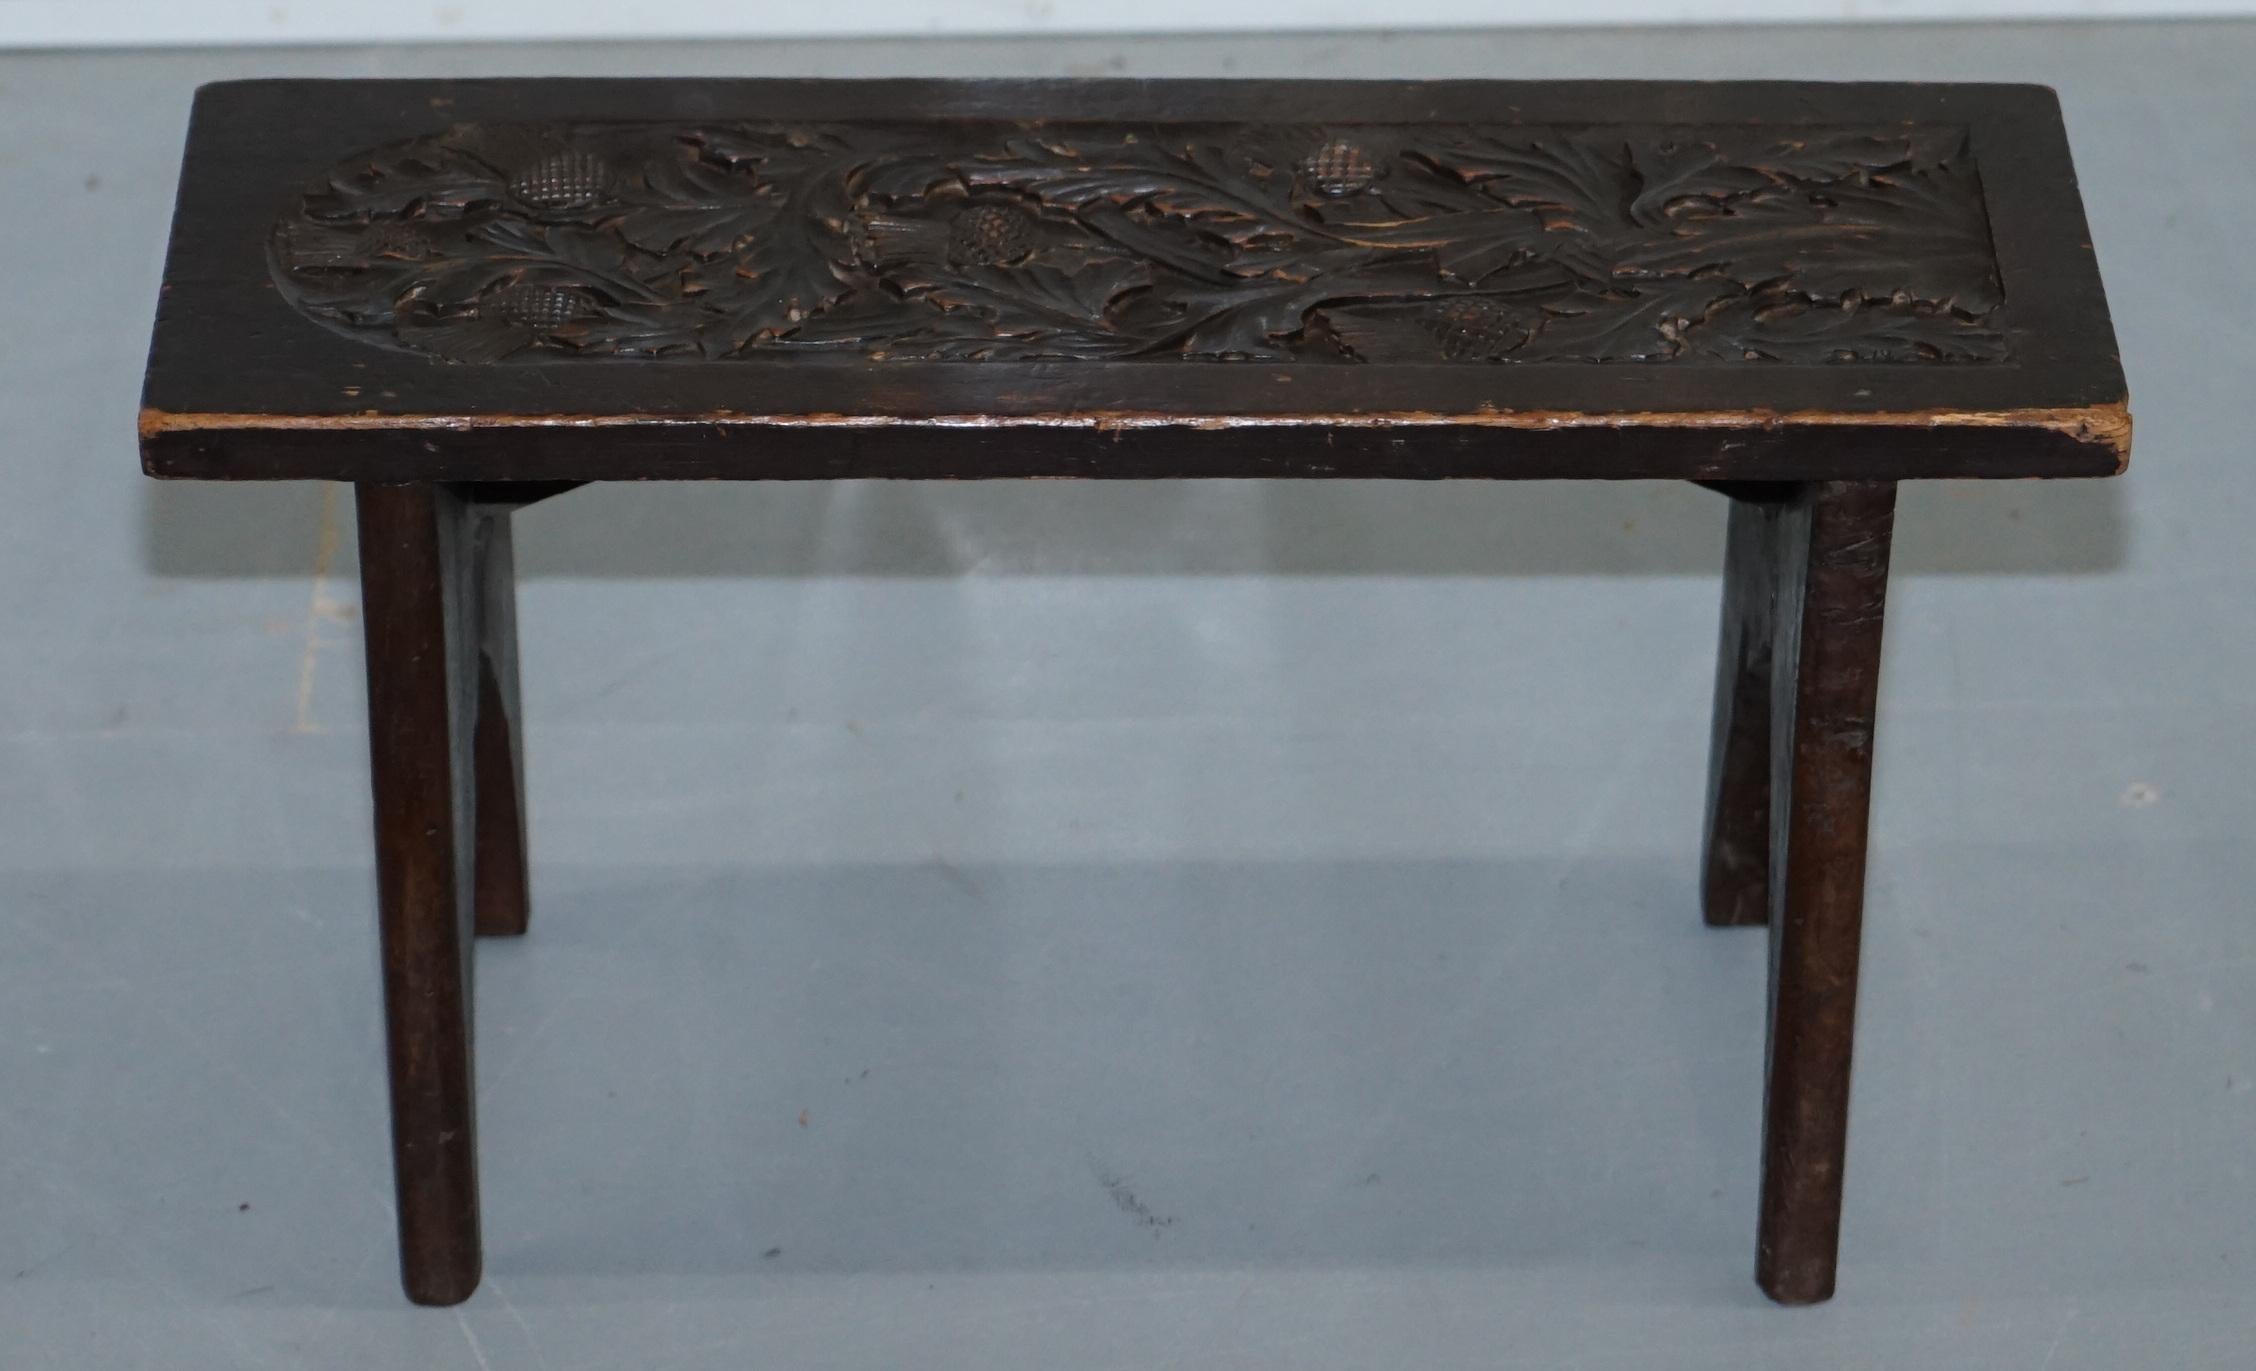 We are delighted to offer for sale this lovely little Liberty’s London hand-carved side table

A very good looking and well-made piece, ideally suited to sit beside a chair or sofa and used as a drinks table, that said its so decorative and well